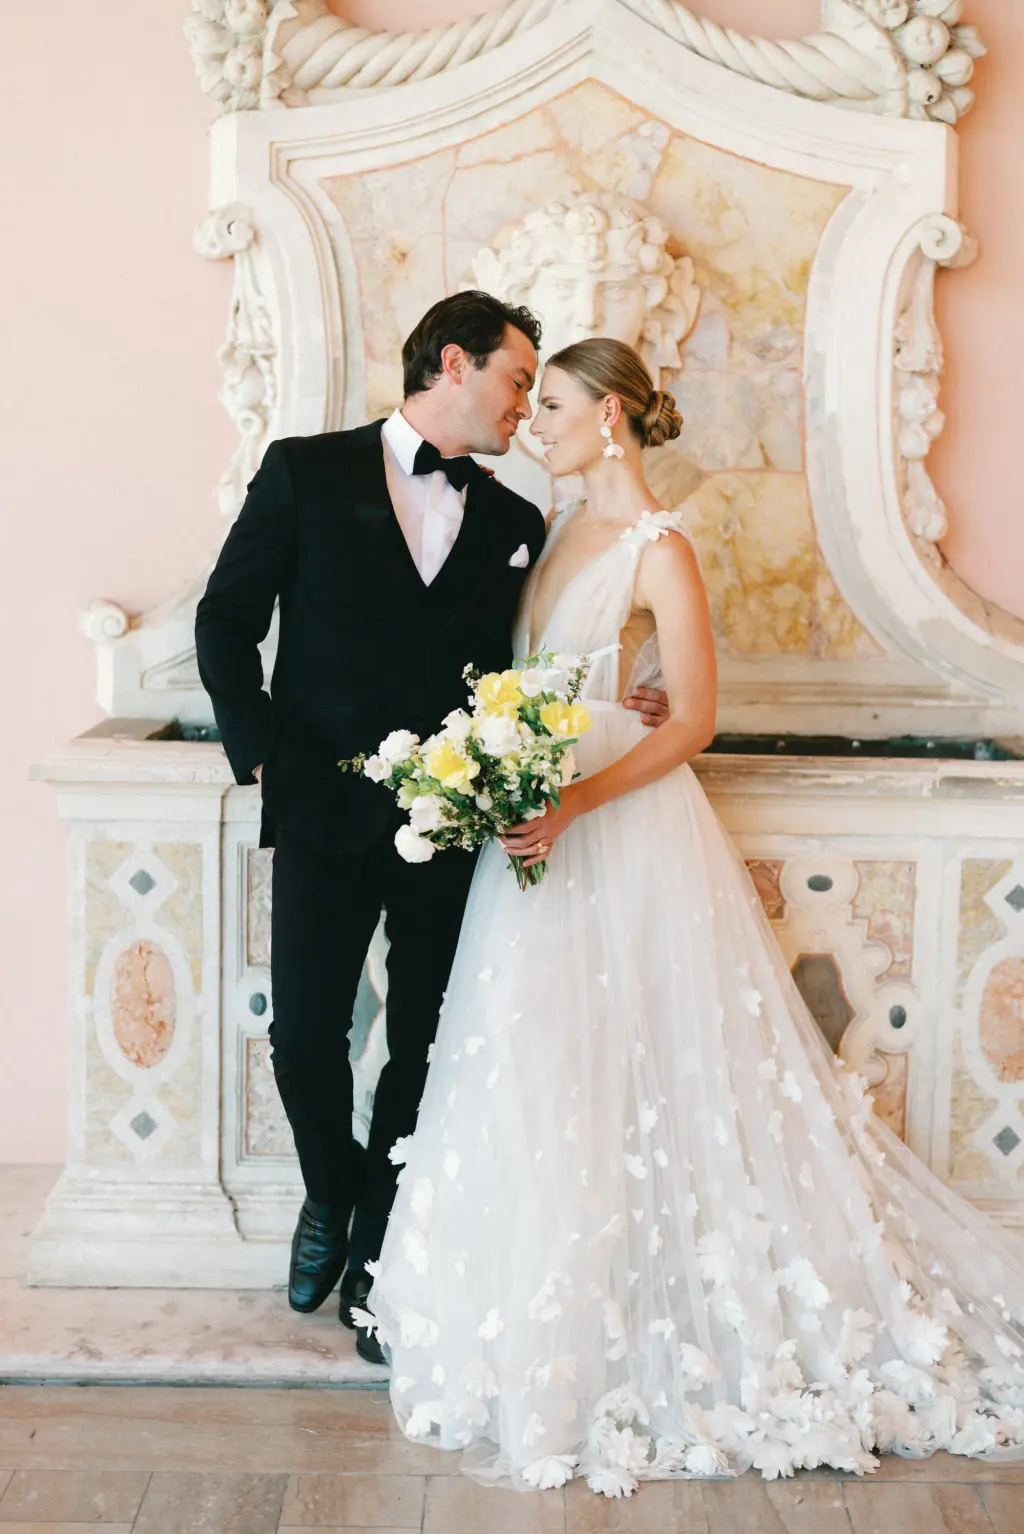 Intimate Bride and Groom Wedding Portrait | Sarasota Photographer Amber Yonker Photography | White Tulle Deep V Neckline, A-Line Marchesa Italian Wedding Dress with Floral Applique Inspiration